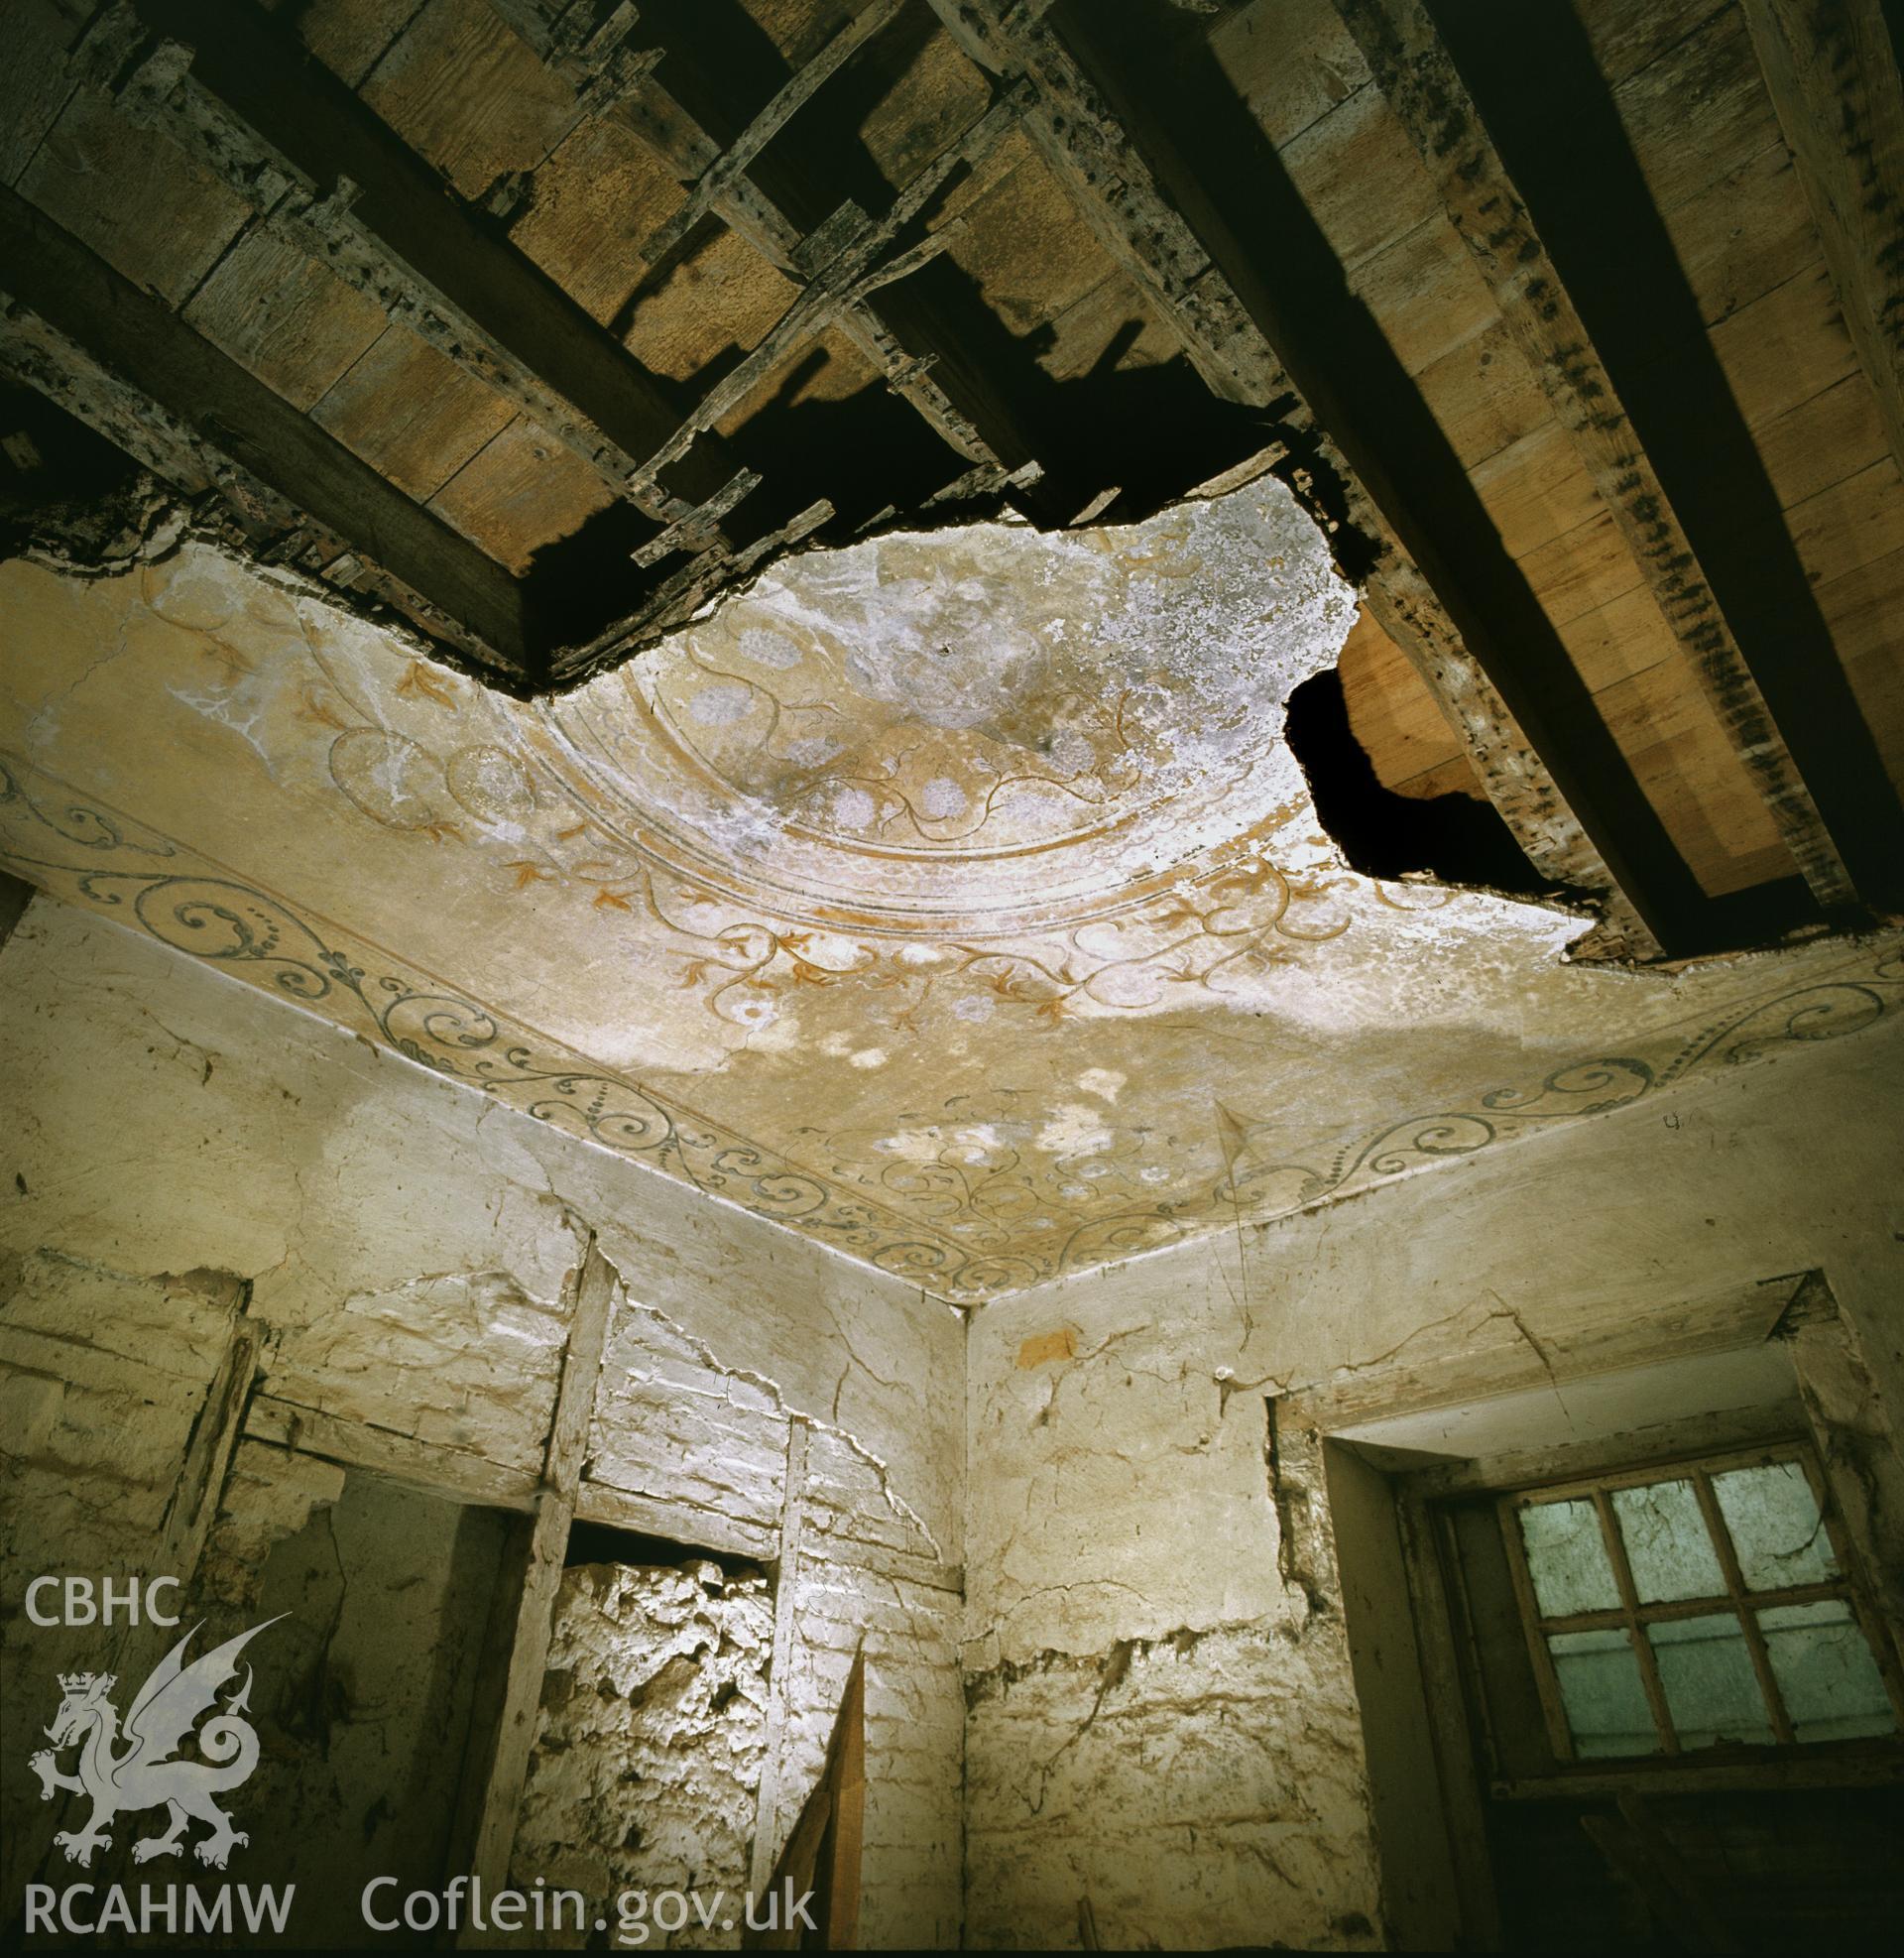 RCAHMW colour transparency showing the Adam-style ceiling at Glanrhyd, Clynderwen, taken by I.N. Wright, circa 1982